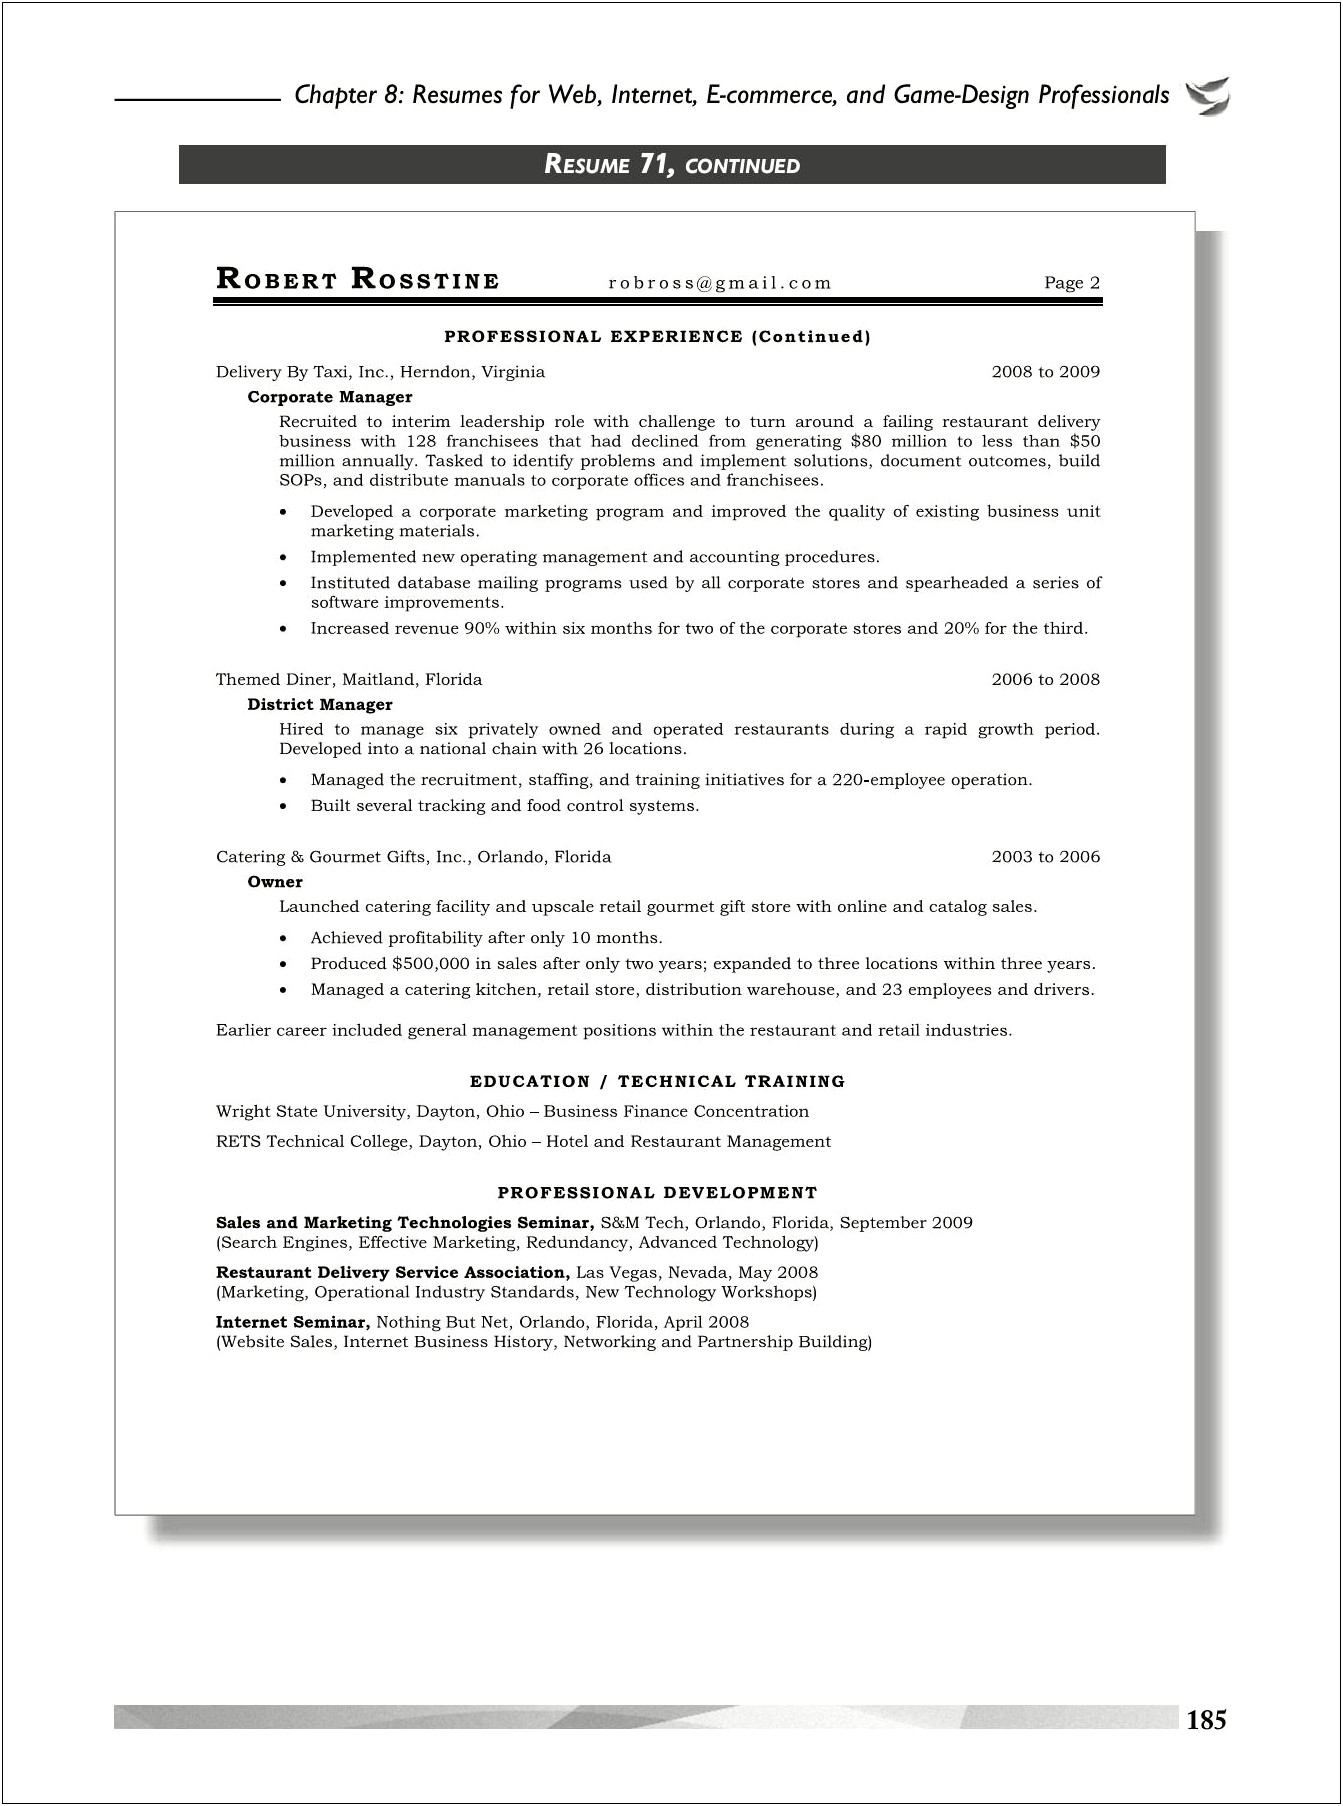 Page 2 Of Resume Proffessional Experience Continued